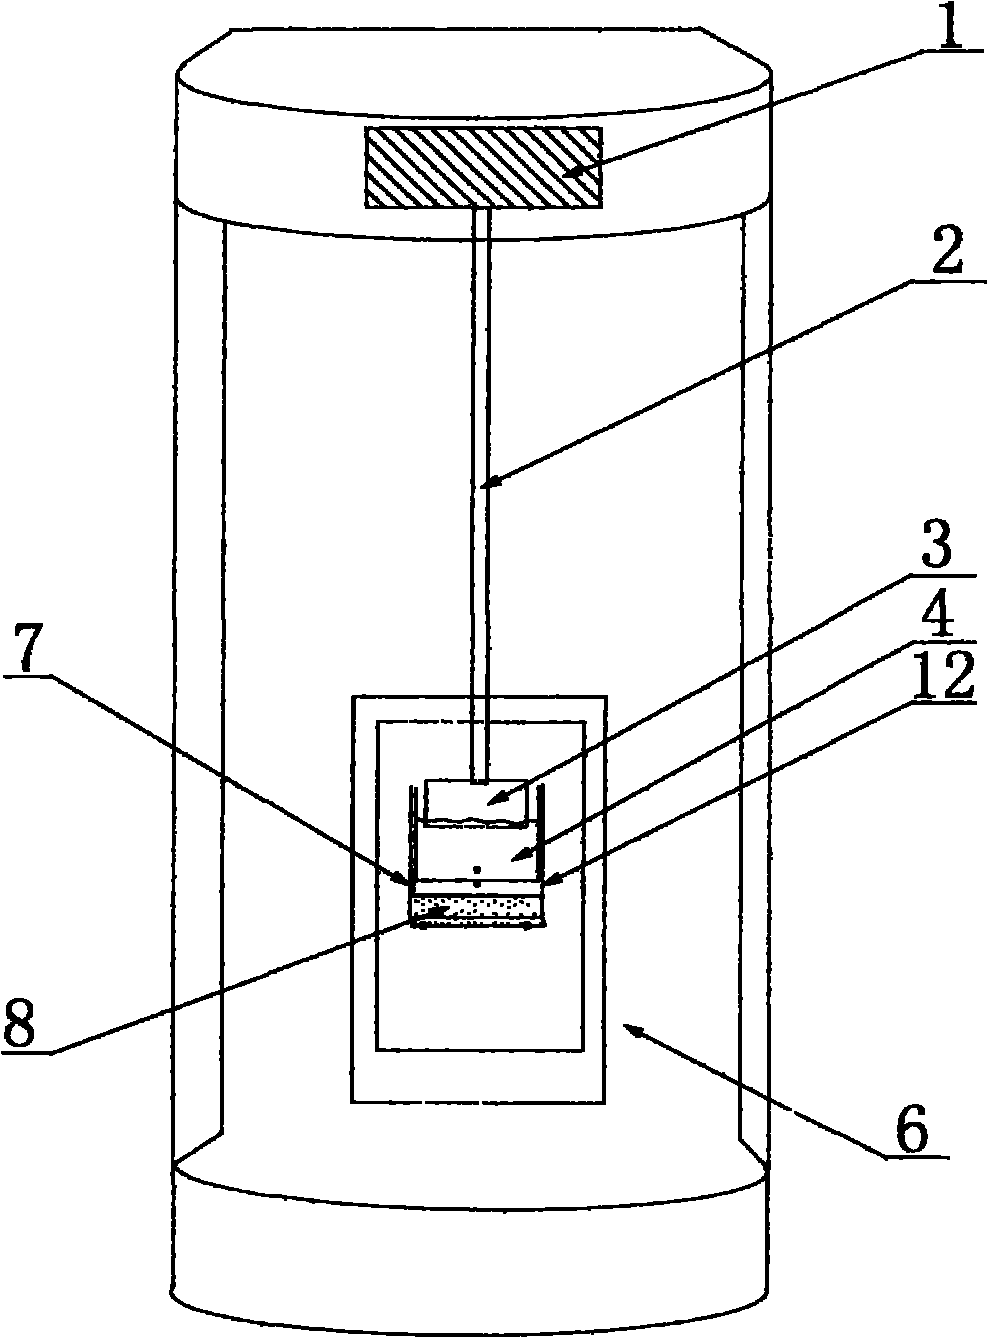 Apparatus and method for testing light-gas surface tension and light-liquid interfacial tension by using wilhelmy plate method